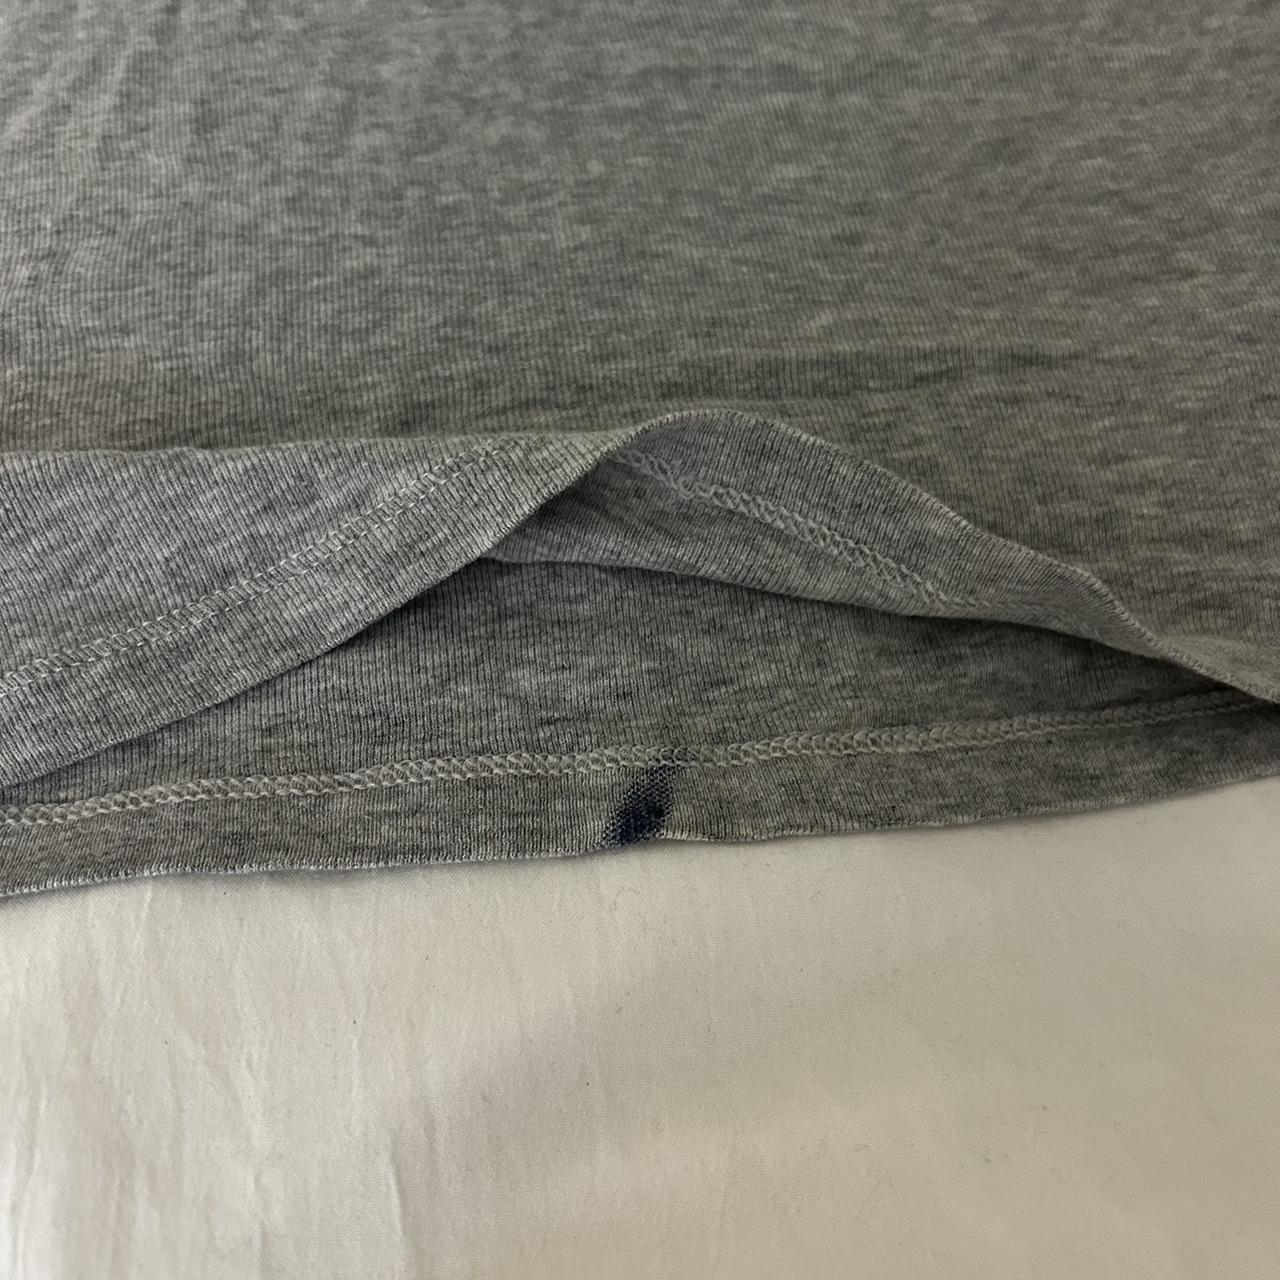 GUESS grey tank early 2000s vintage guess tank... - Depop